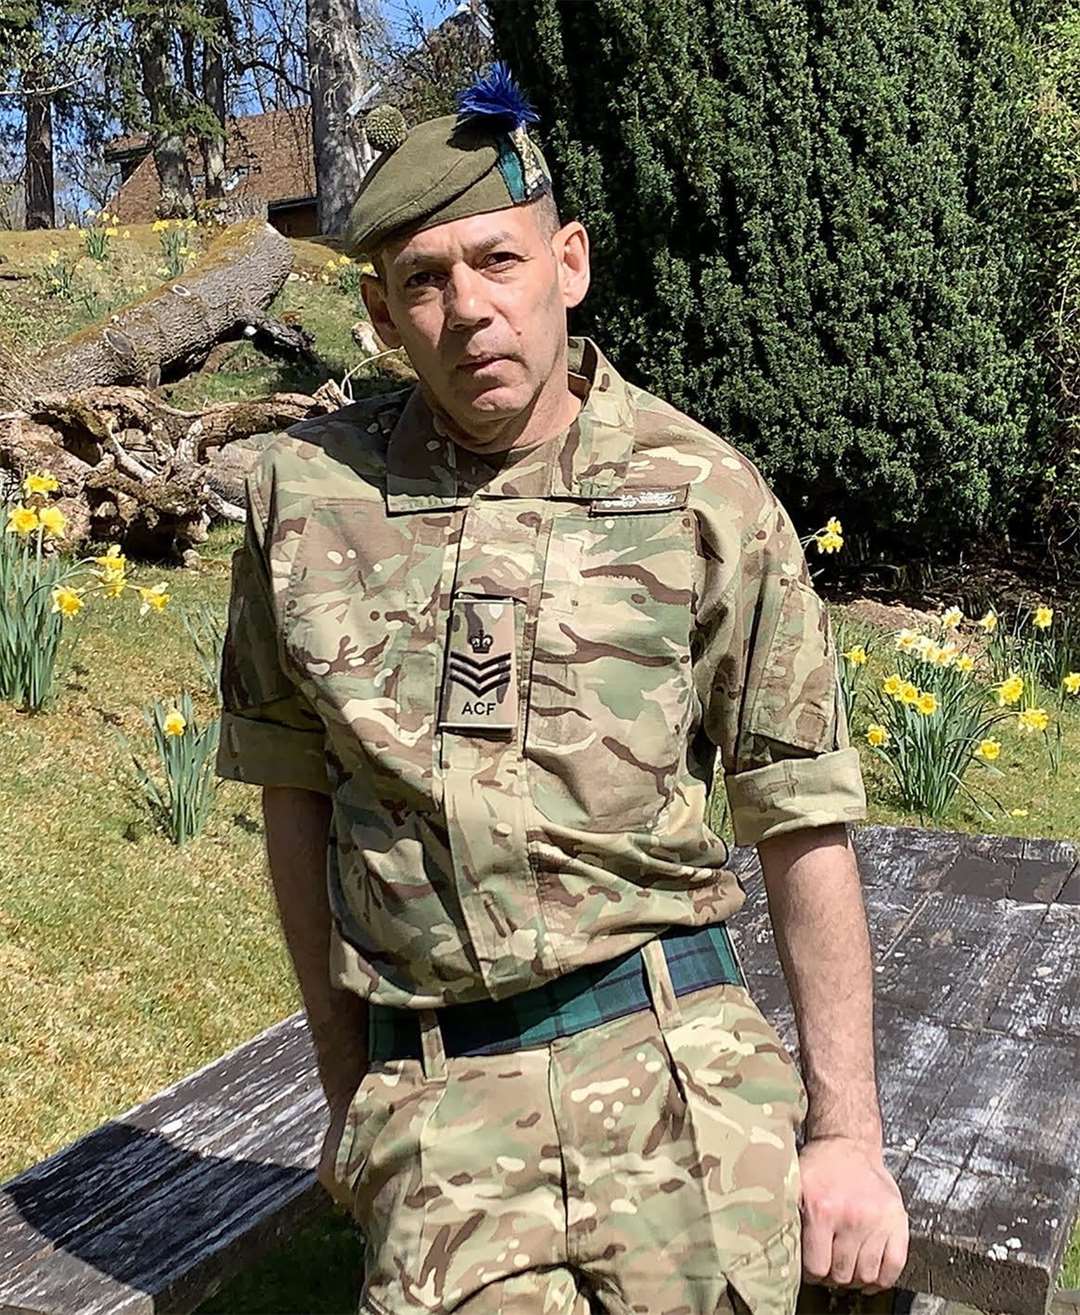 Tony Brown at Forces Manor, the new military R&R base in Kincraig: "When we saw it we thought it might be a cadet wearing camouflage! It was quite a surprise."